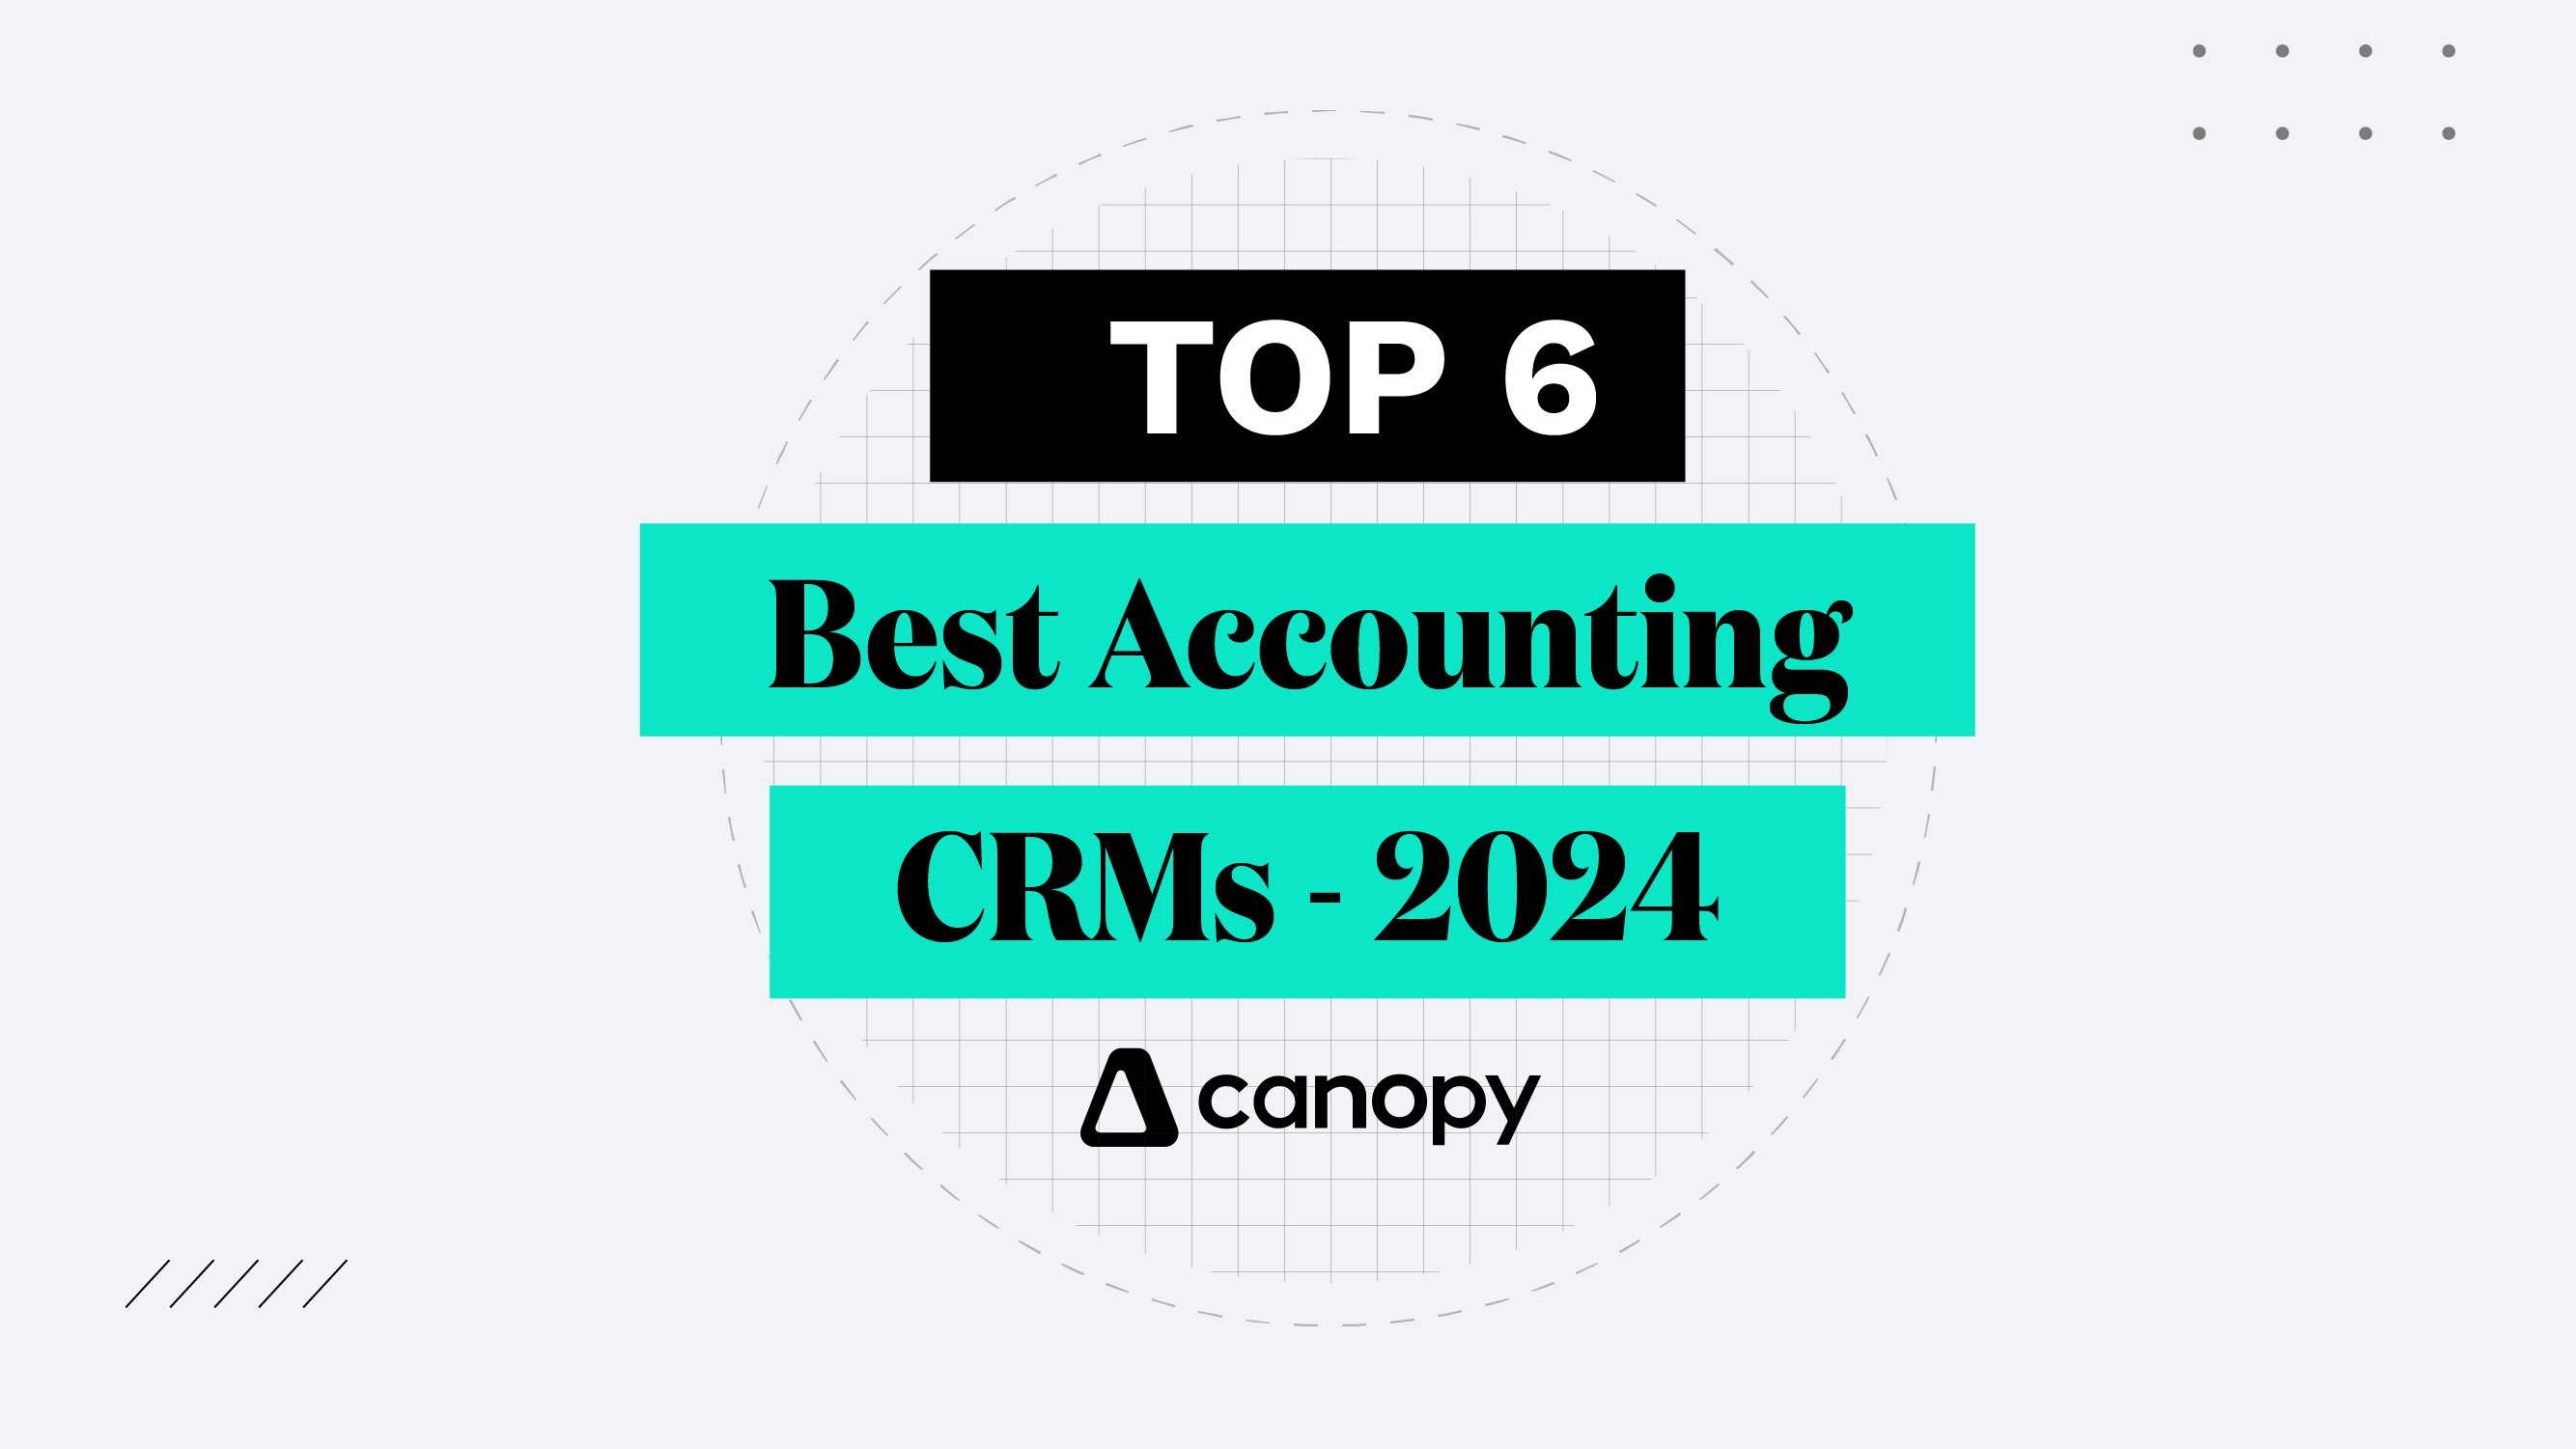 Top 6 Best Accounting CRMs - 2024